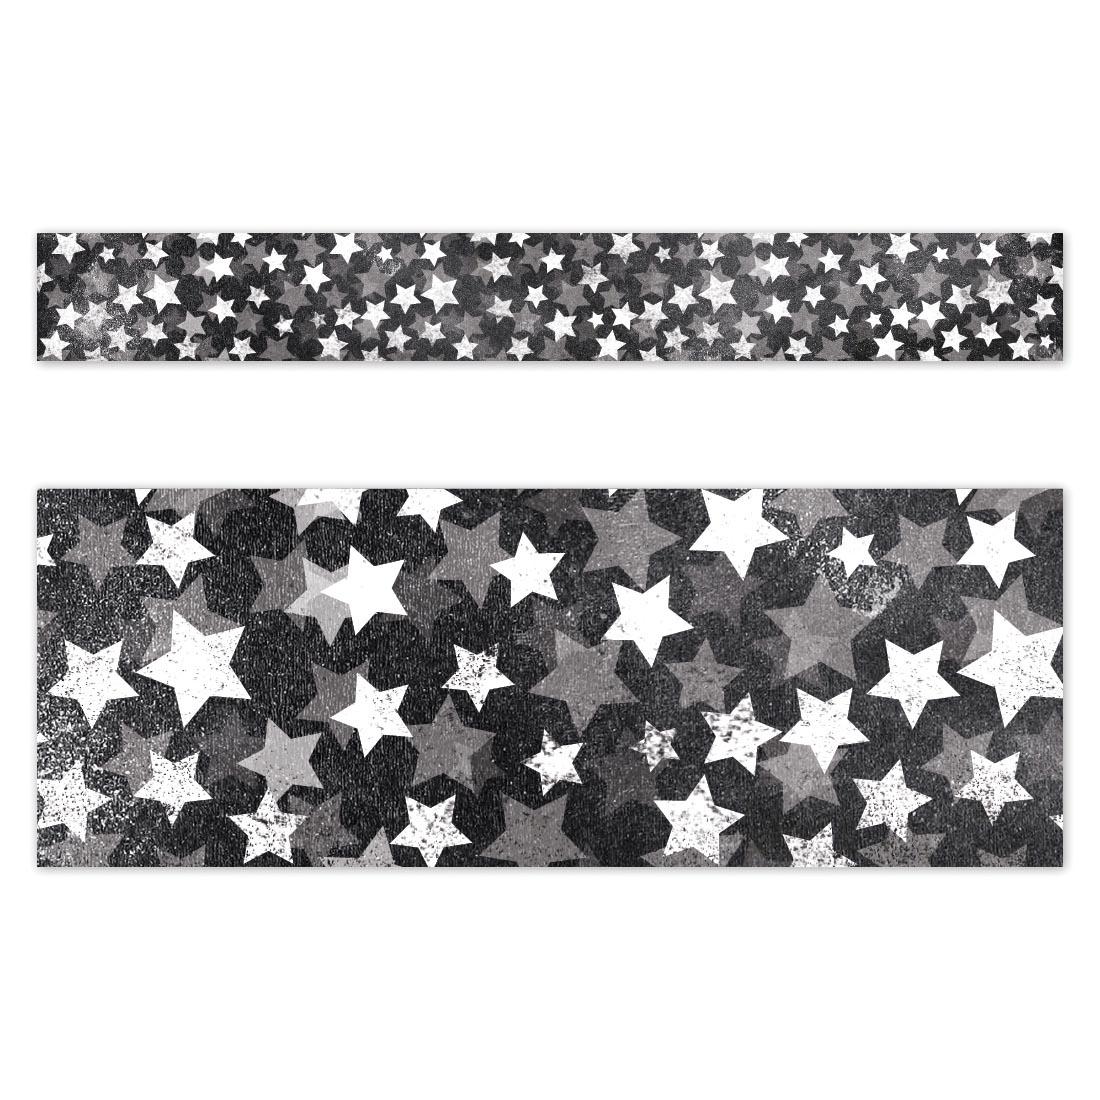 Full strip plus closeup of Chalk Stars EZ Border from the Chalk It Up! Collection By Creative Teaching Press